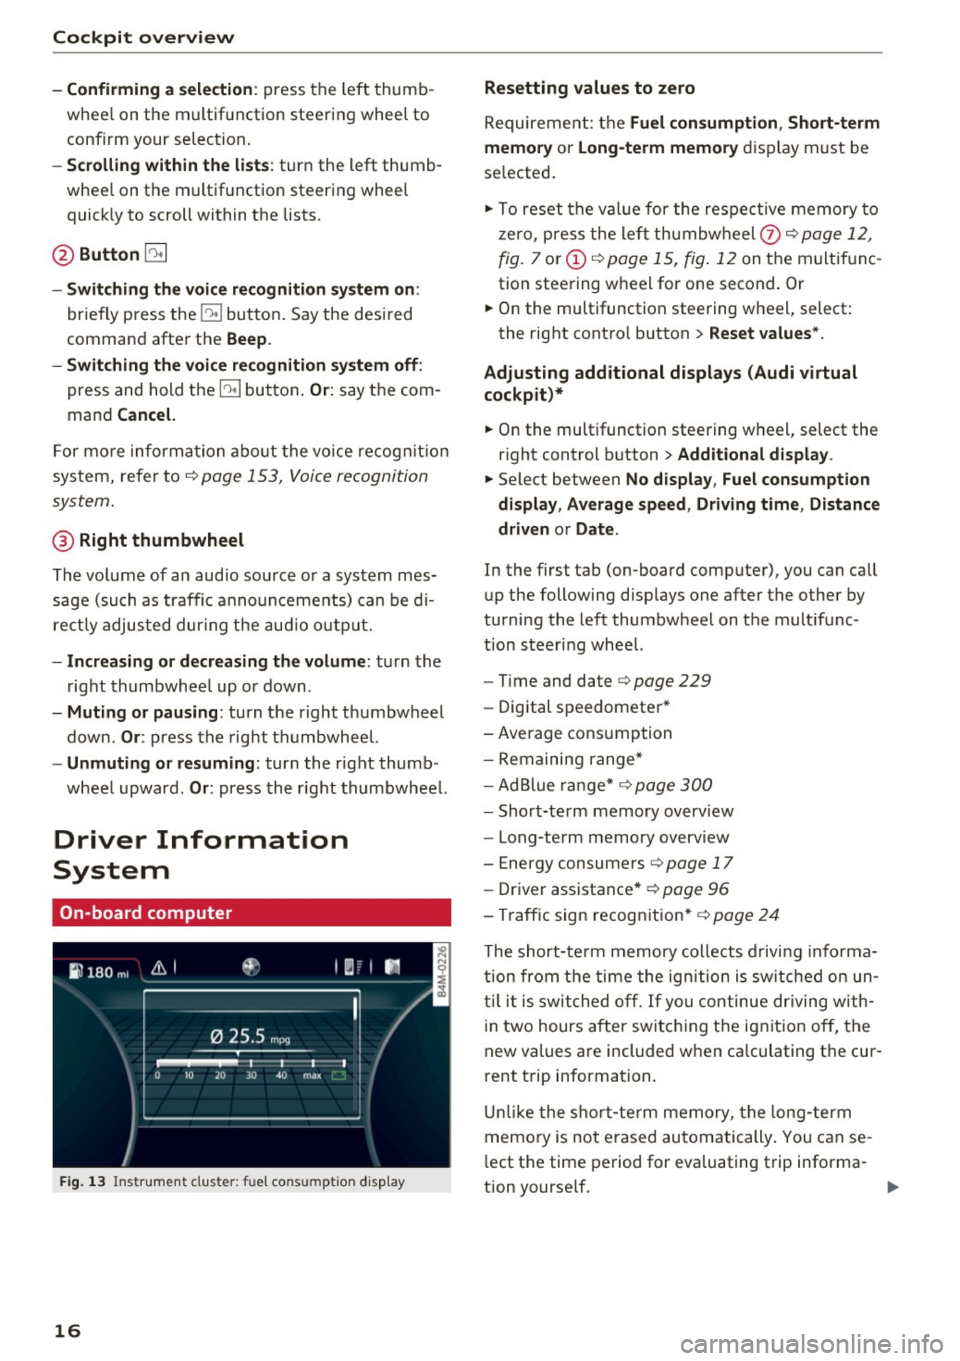 AUDI S4 2017  Owners Manual Cockpit  overview 
- Confirming  a  selection: 
press  the left  thumb ­
whee l on  the  multif unction  steering  wheel  to 
confirm  your  selection . 
-Scrolling  within  the  lists: turn  the  le